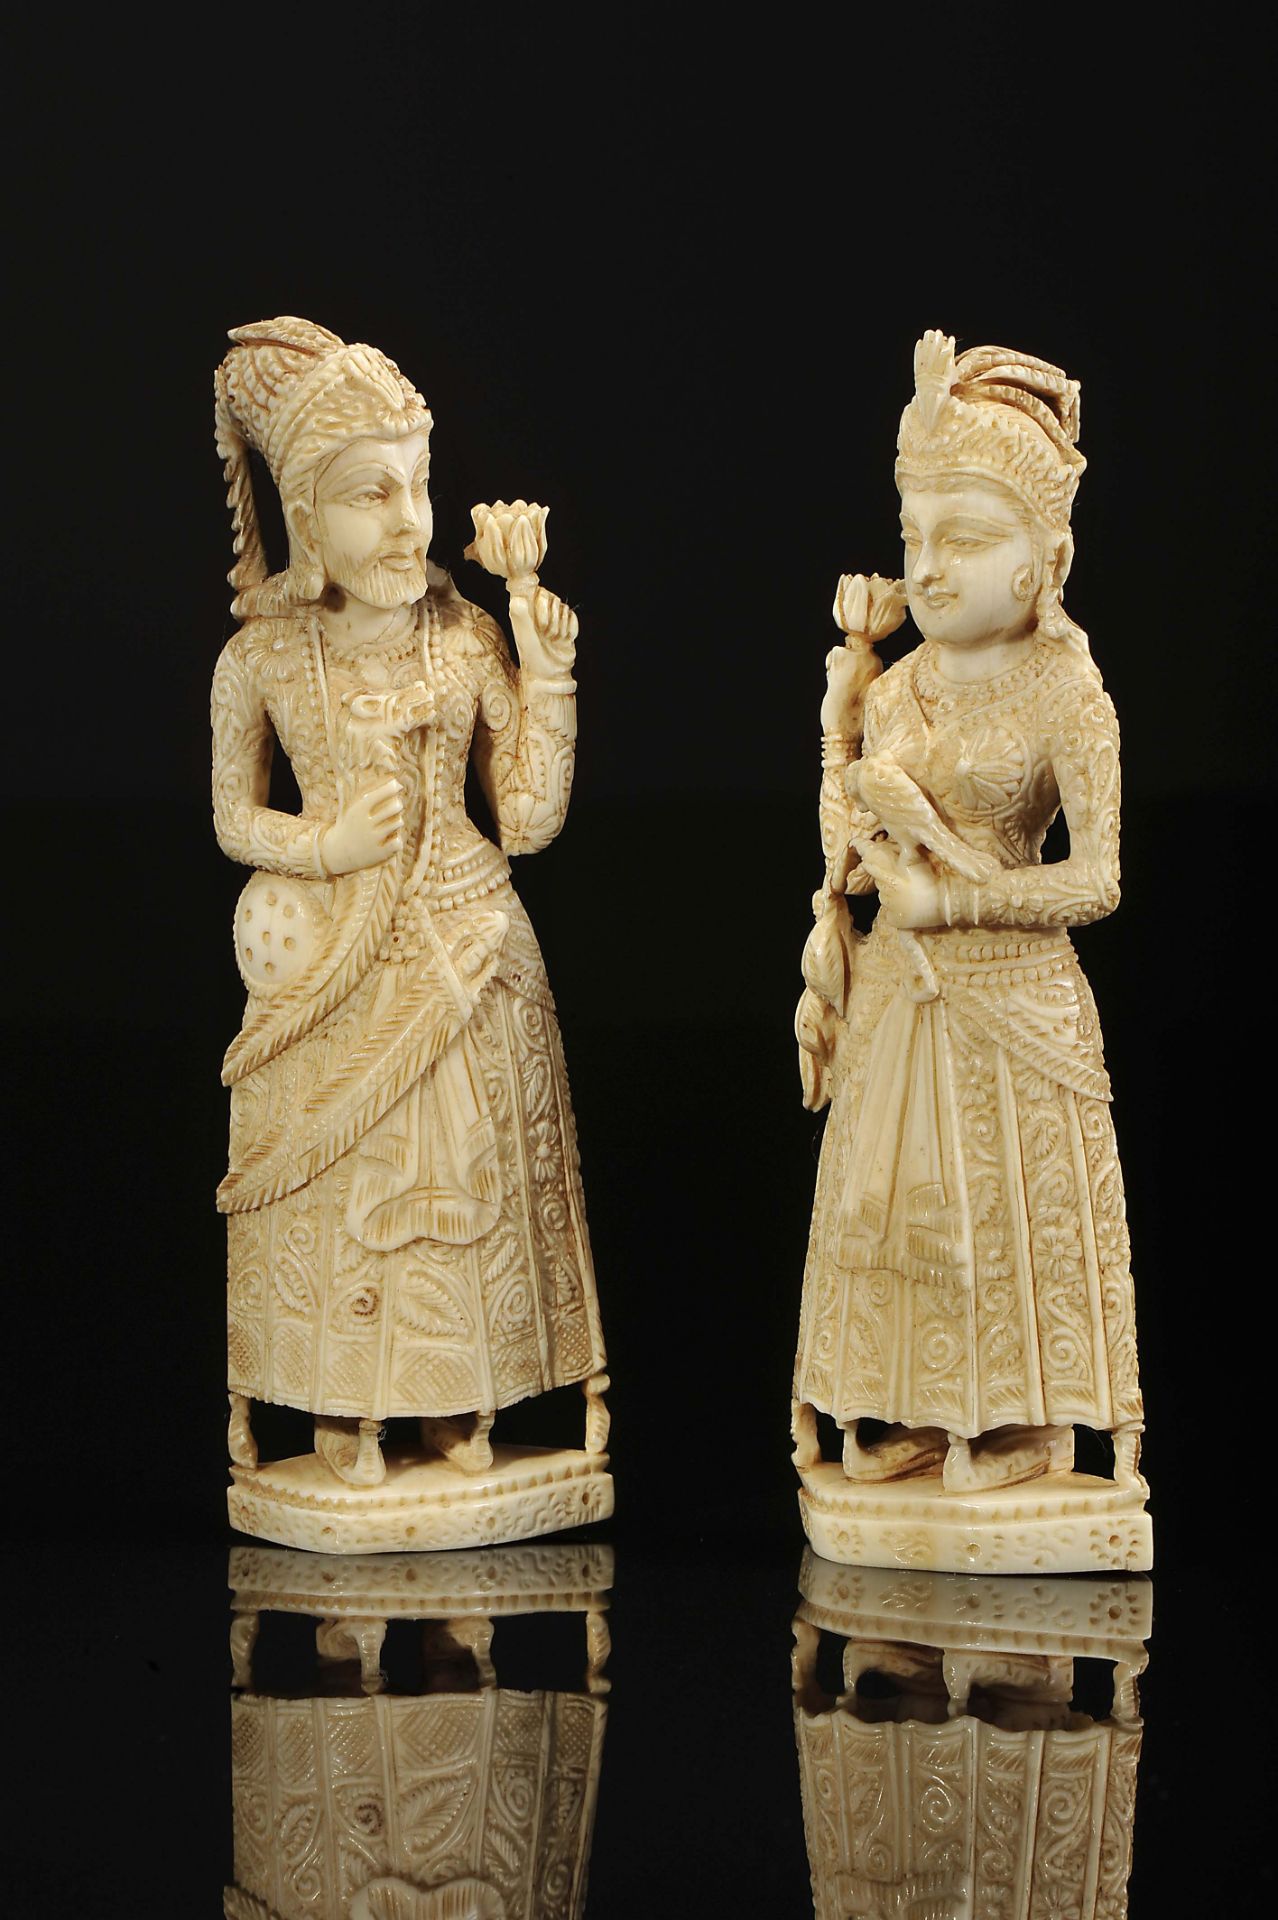 Chess Pieces Mughal Emperor and Empress - Image 4 of 4